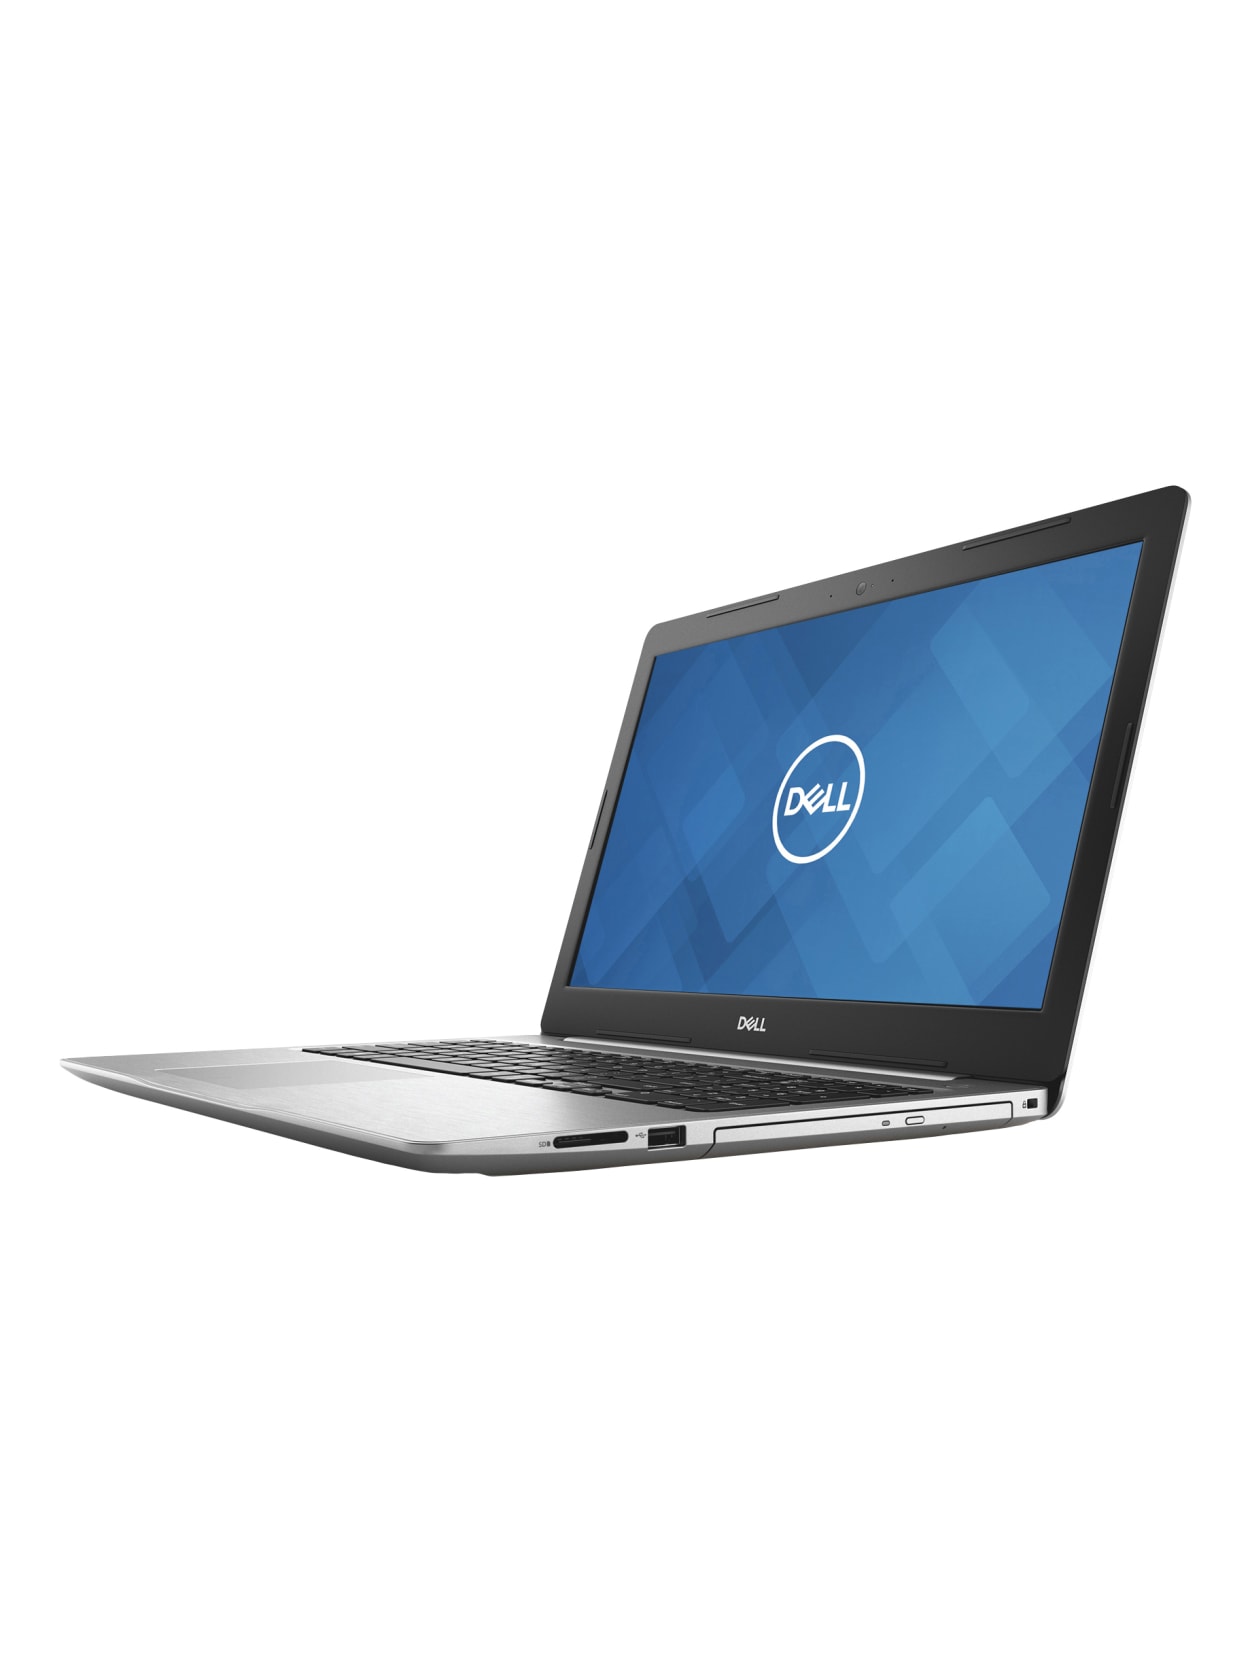 How To Connect External Monitor To Dell Inspiron